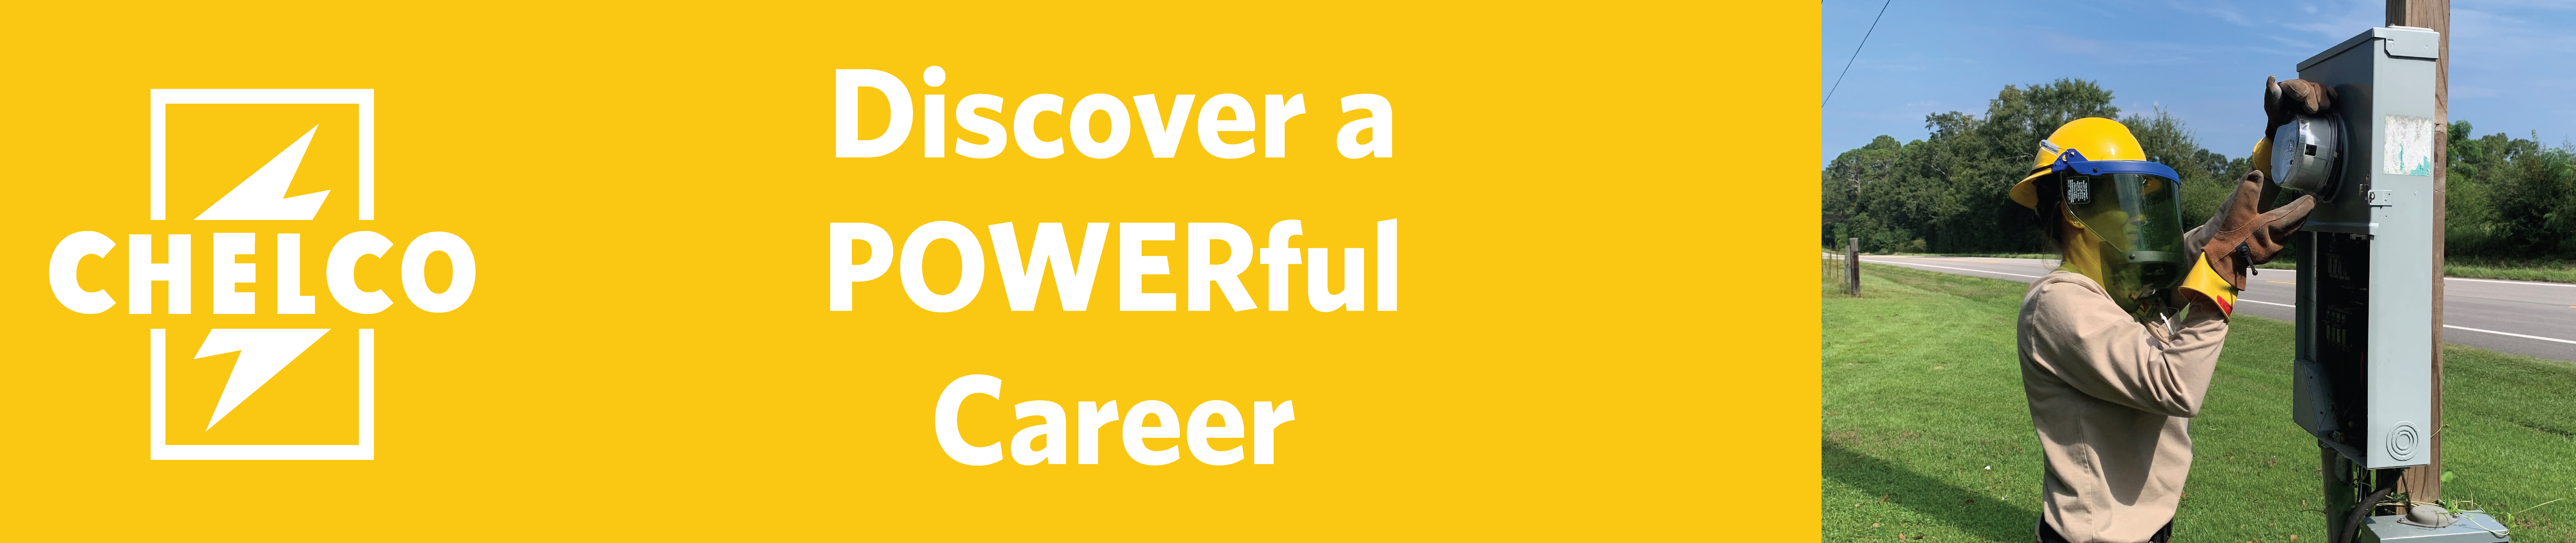 Discover a POWERful careers